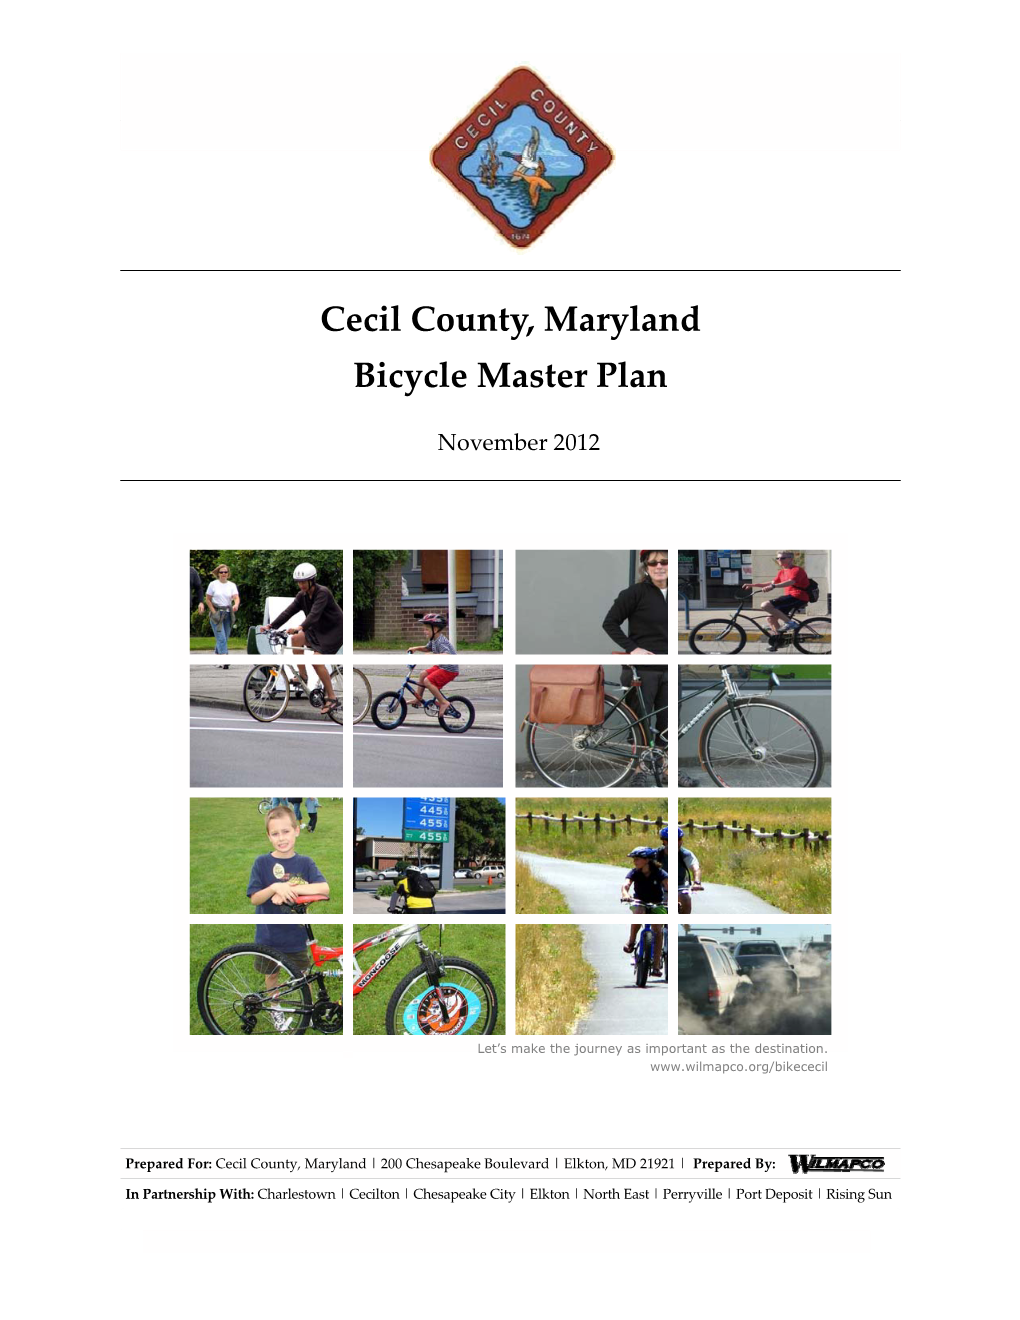 Cecil County, Maryland Bicycle Master Plan